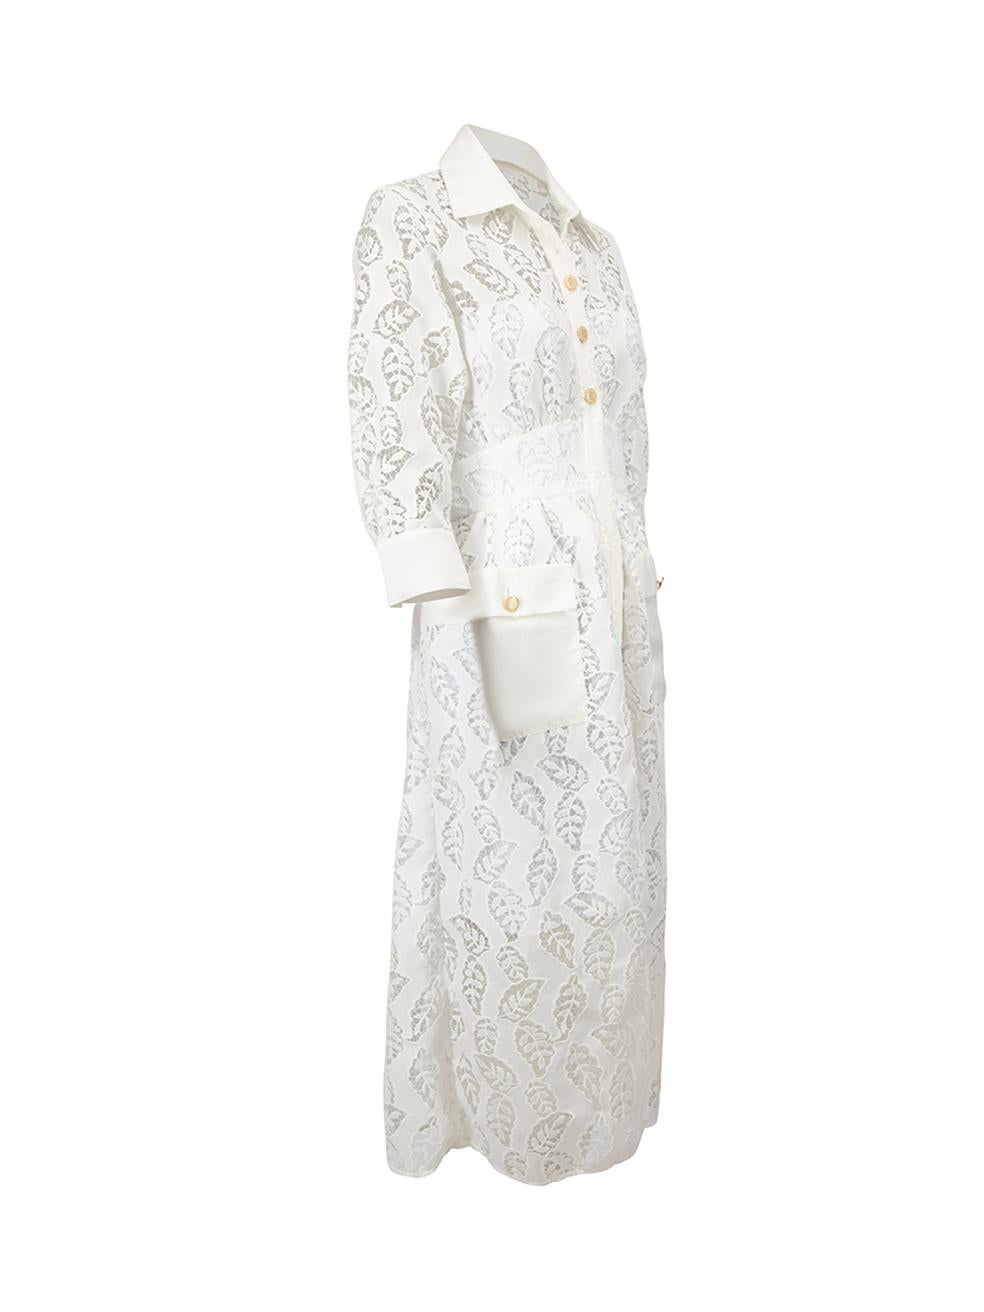 CONDITION is Very good. Minimal wear to dress is evident. Minimal wear to the neckline on this used Sandro designer resale item. 



Details


Cream

Lace

Midi dress

Leaf pattern lace

Front button up closure

3/4 length sleeves with buttoned